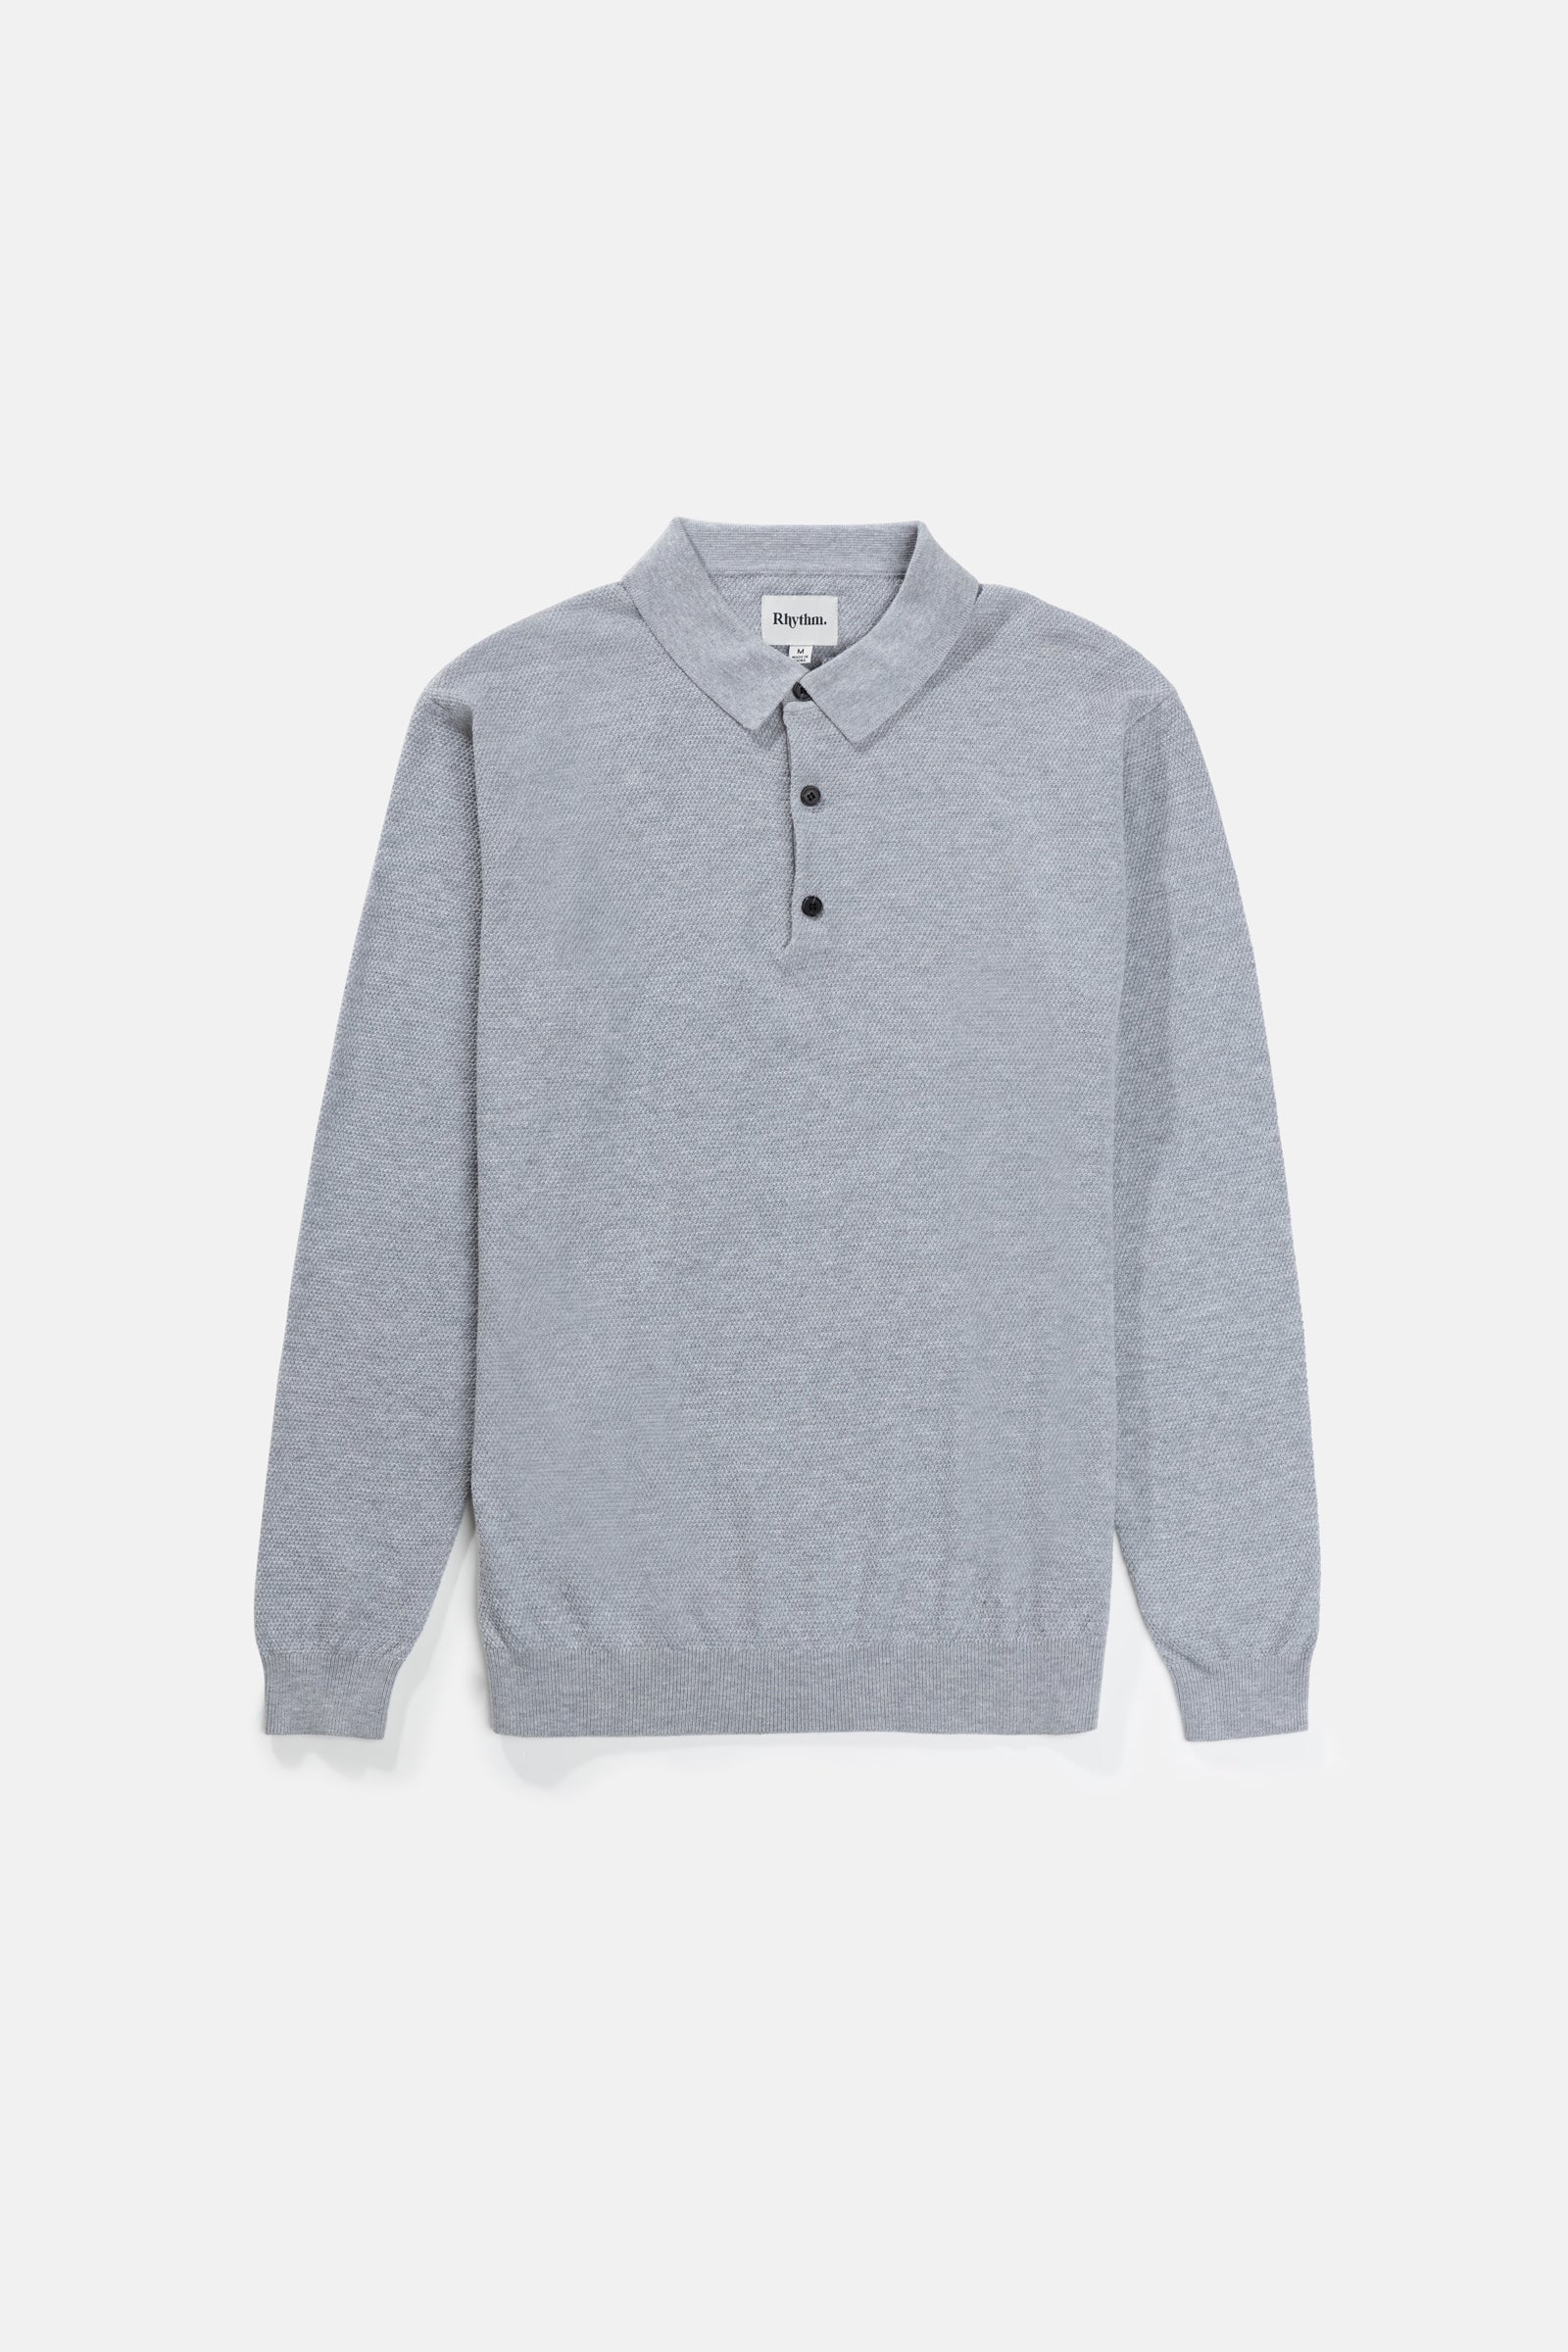 Buy the Louis Heather Wool Polo